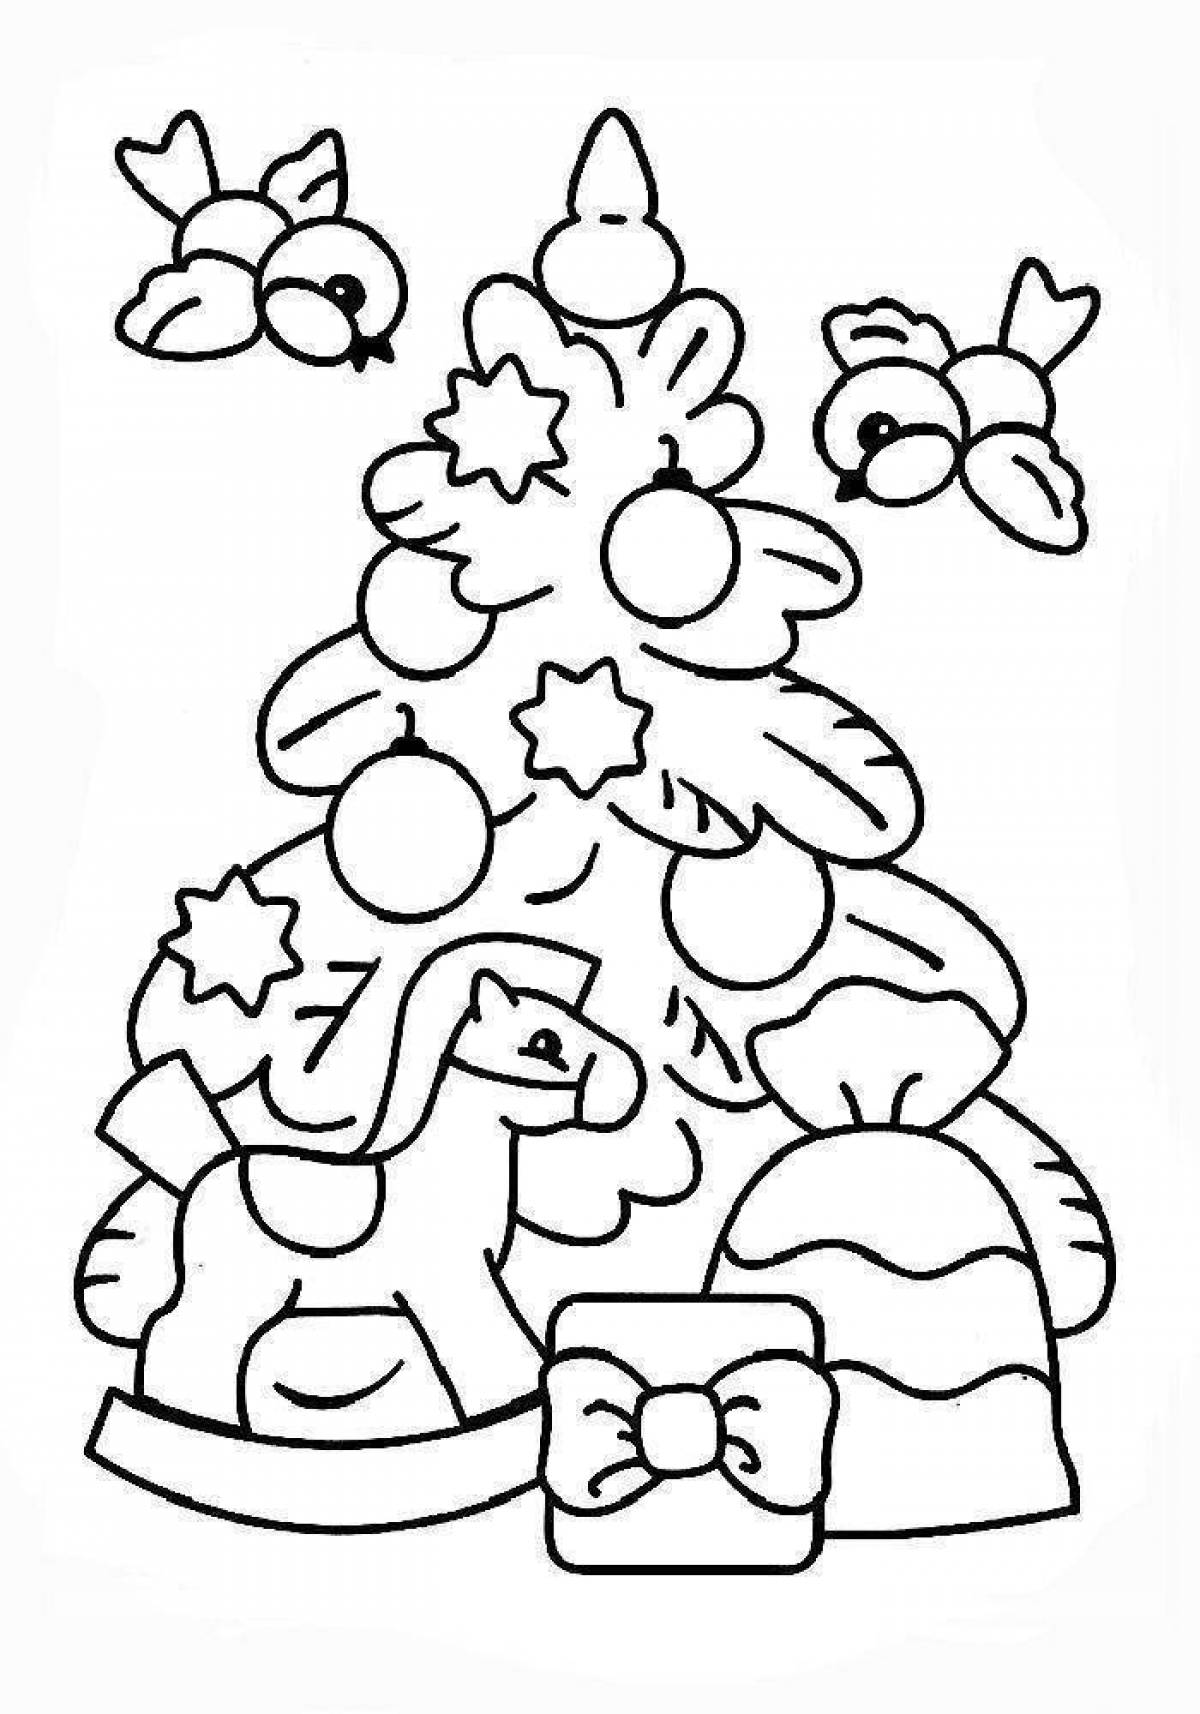 Merry Christmas tree coloring page